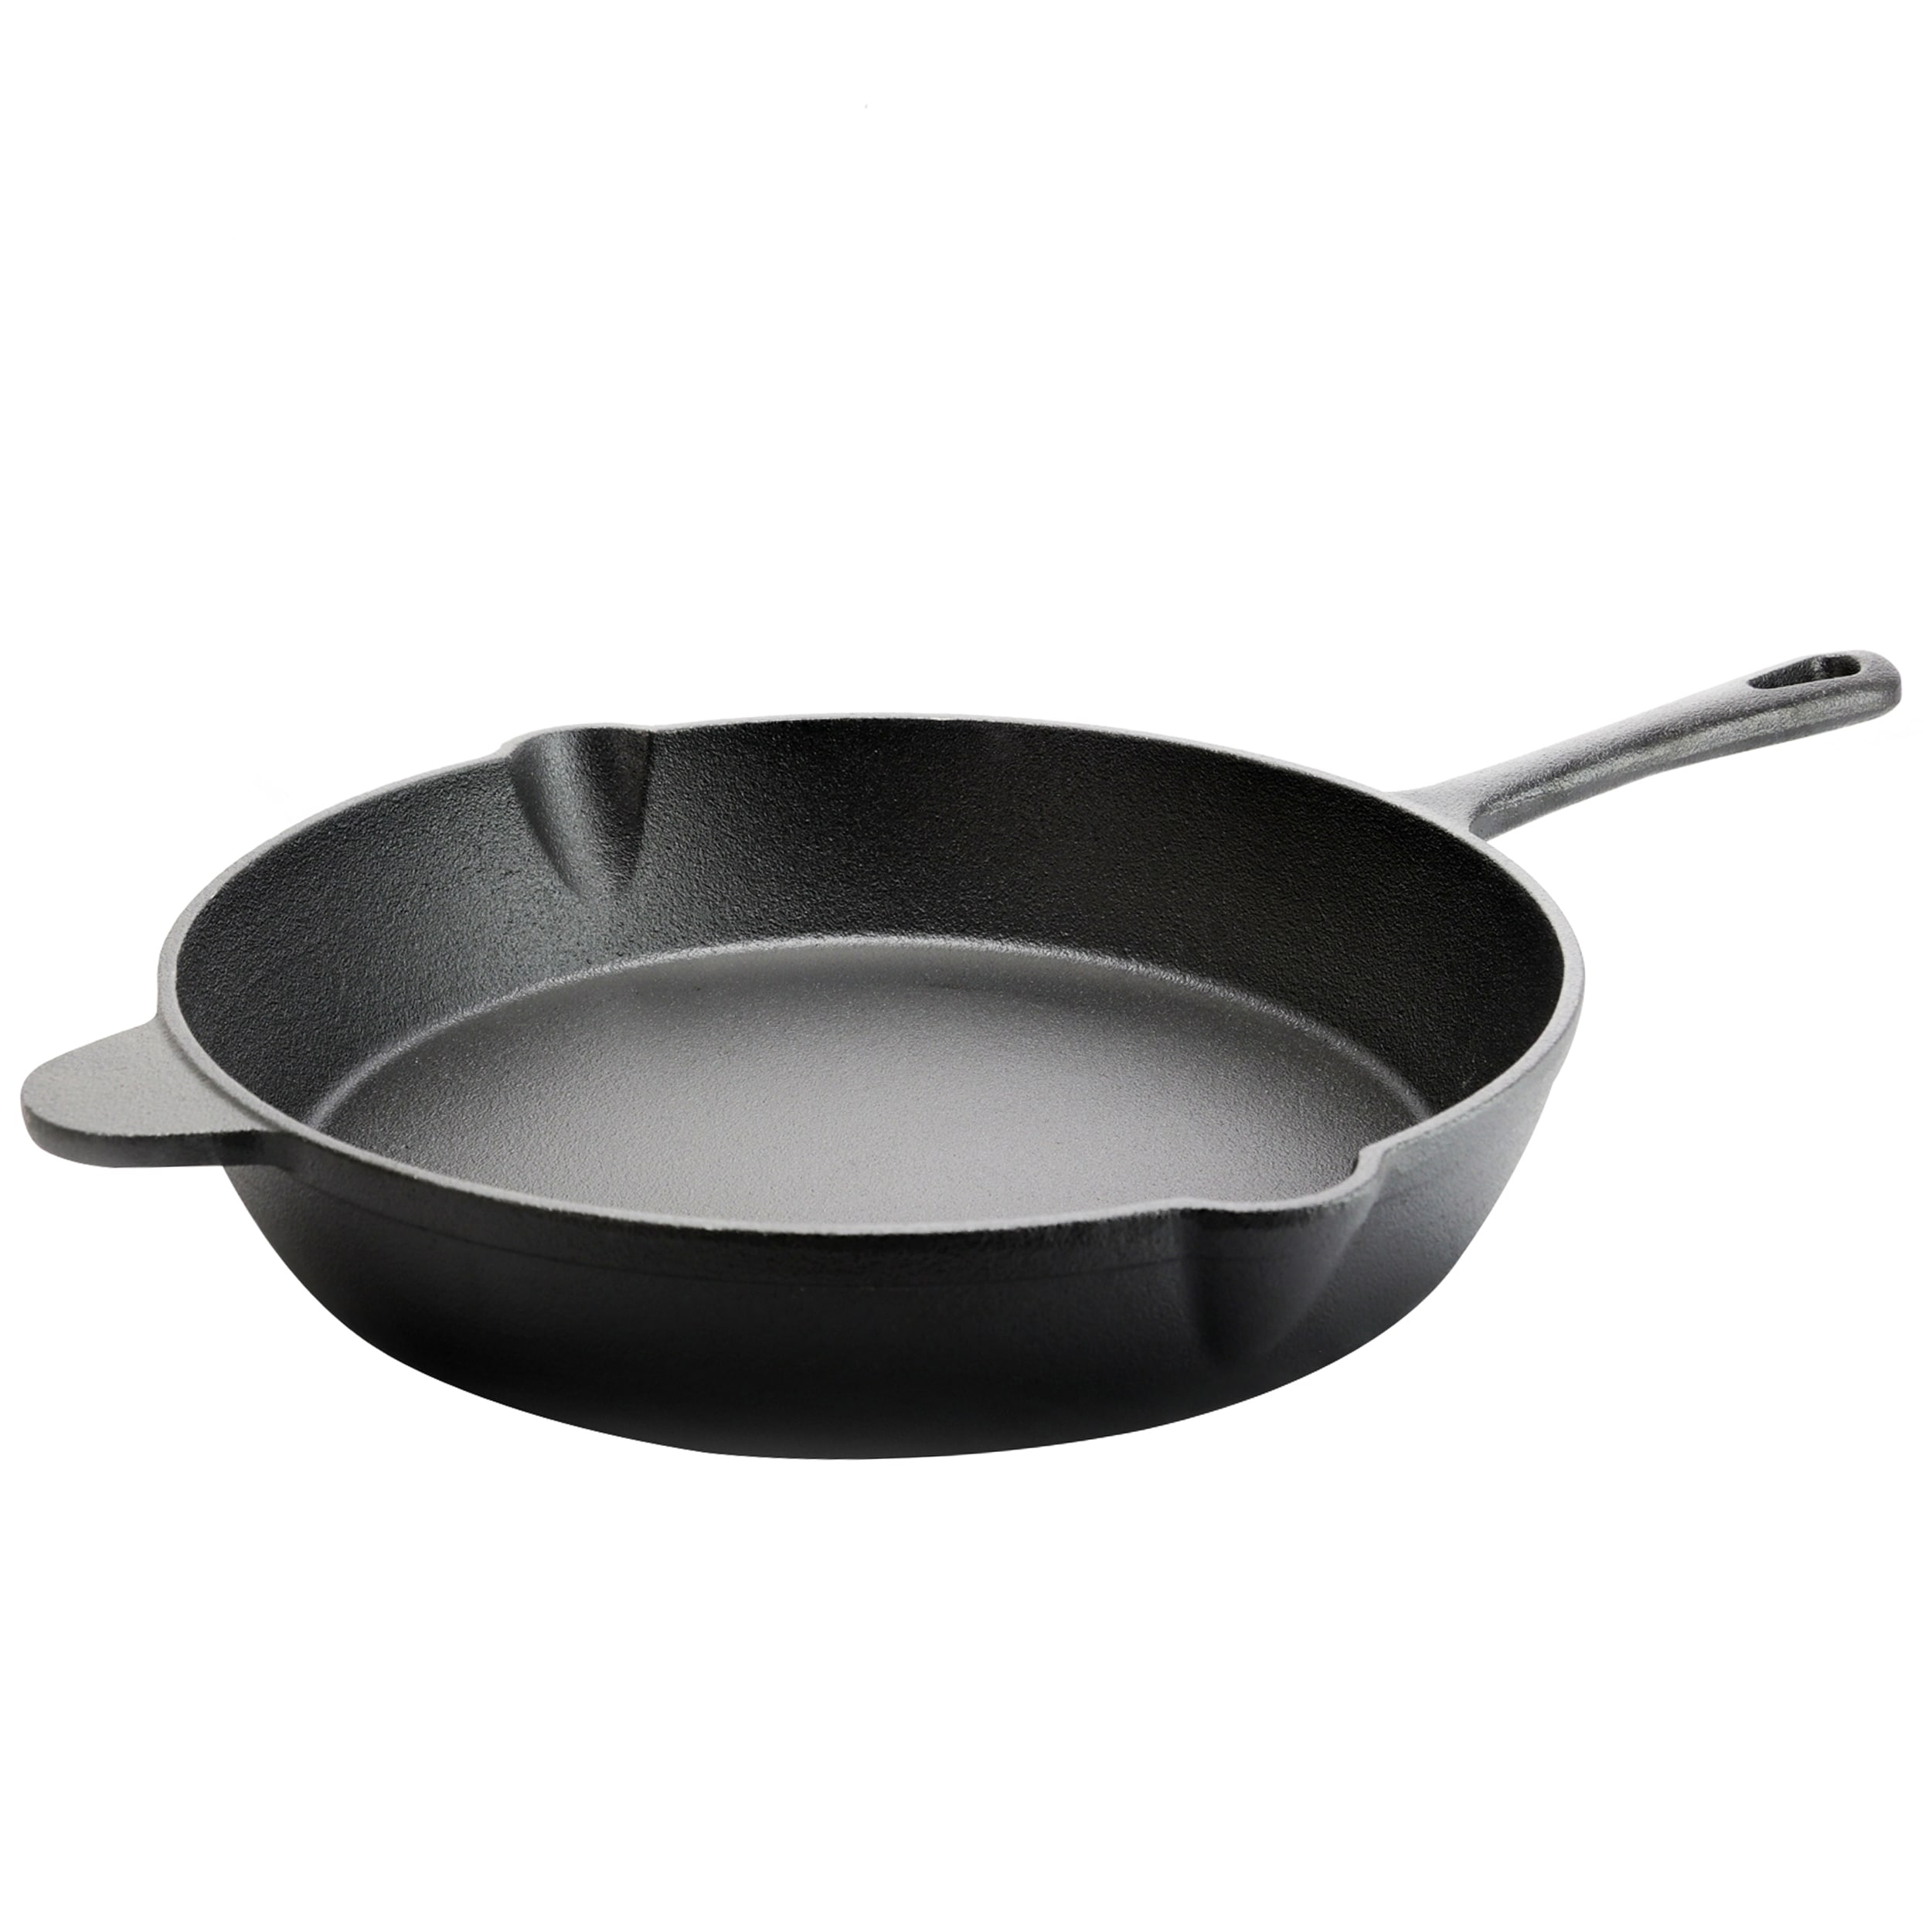 Home Basics 12-inch Pre-Seasoned Cast Iron Skillet with Pour